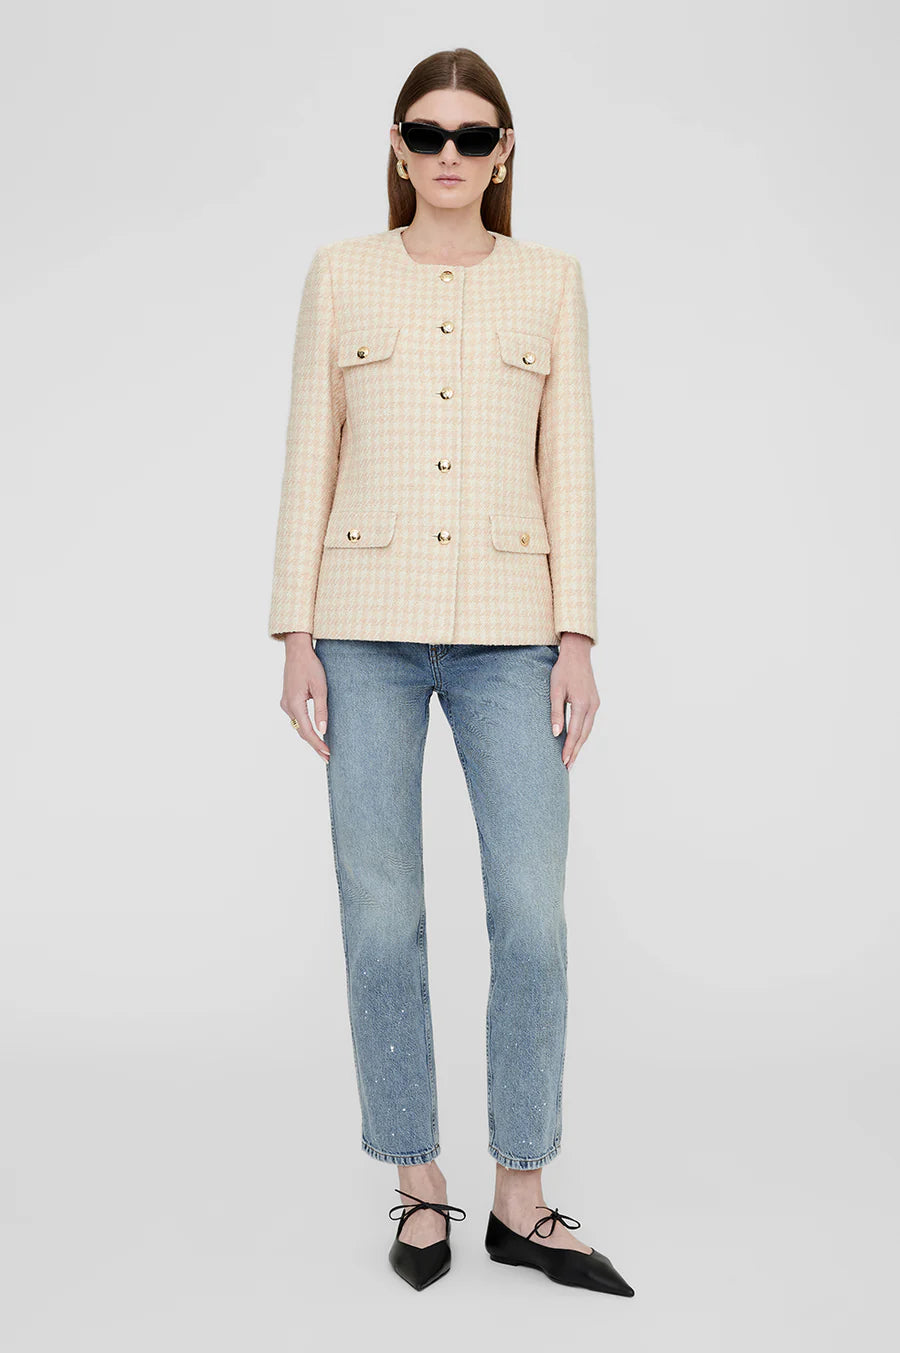 Janet Jacket - Cream And Peach Houndstooth